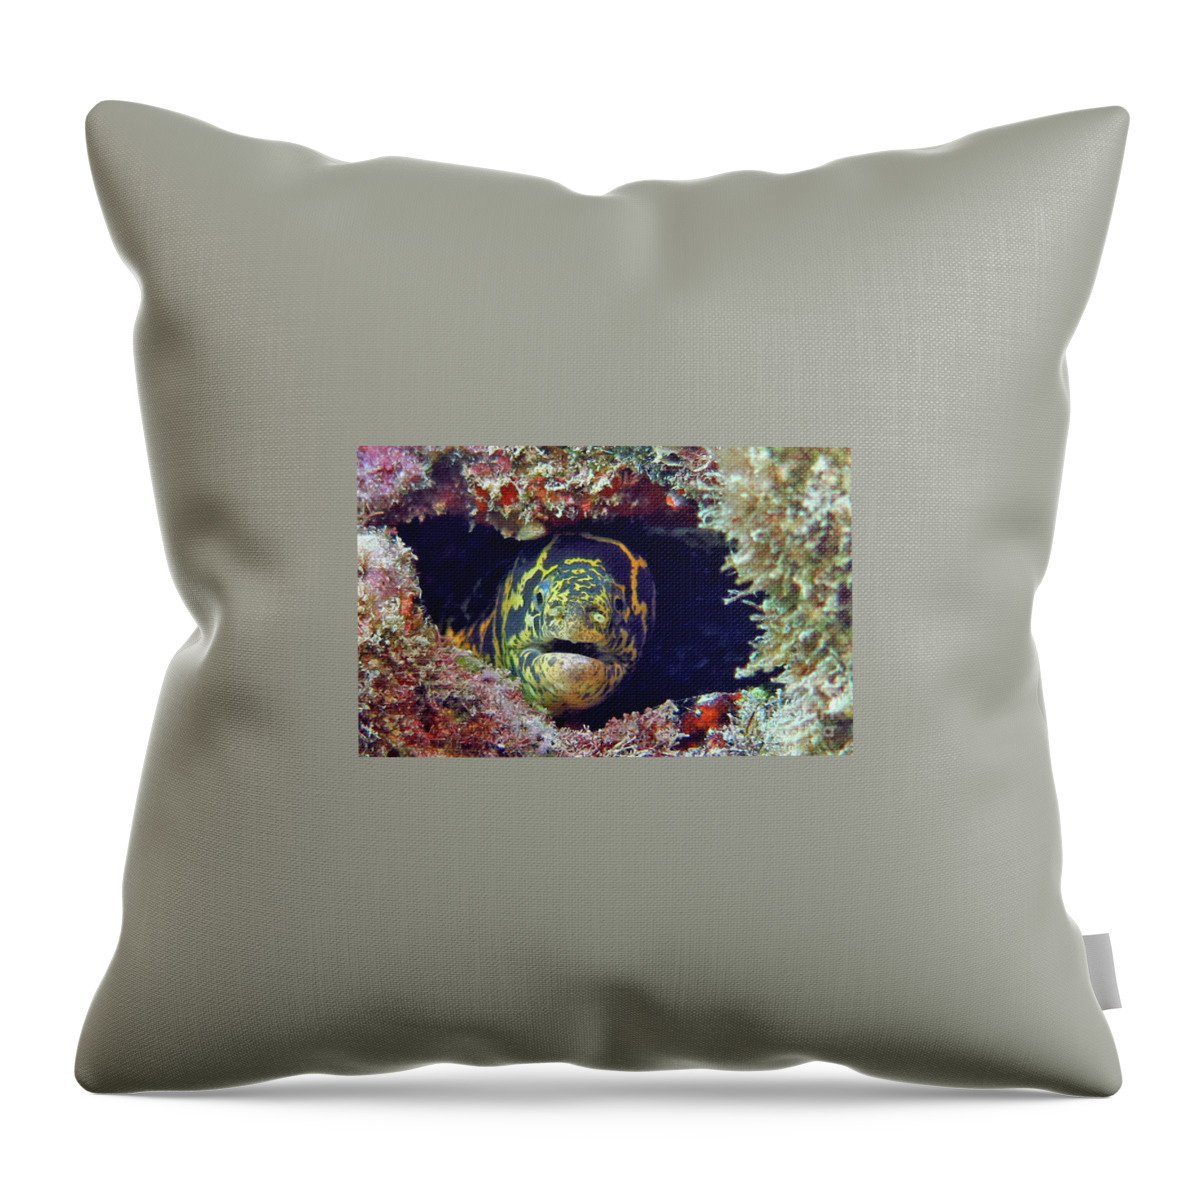 Underwater Throw Pillow featuring the photograph Chain Moray Eel by Daryl Duda